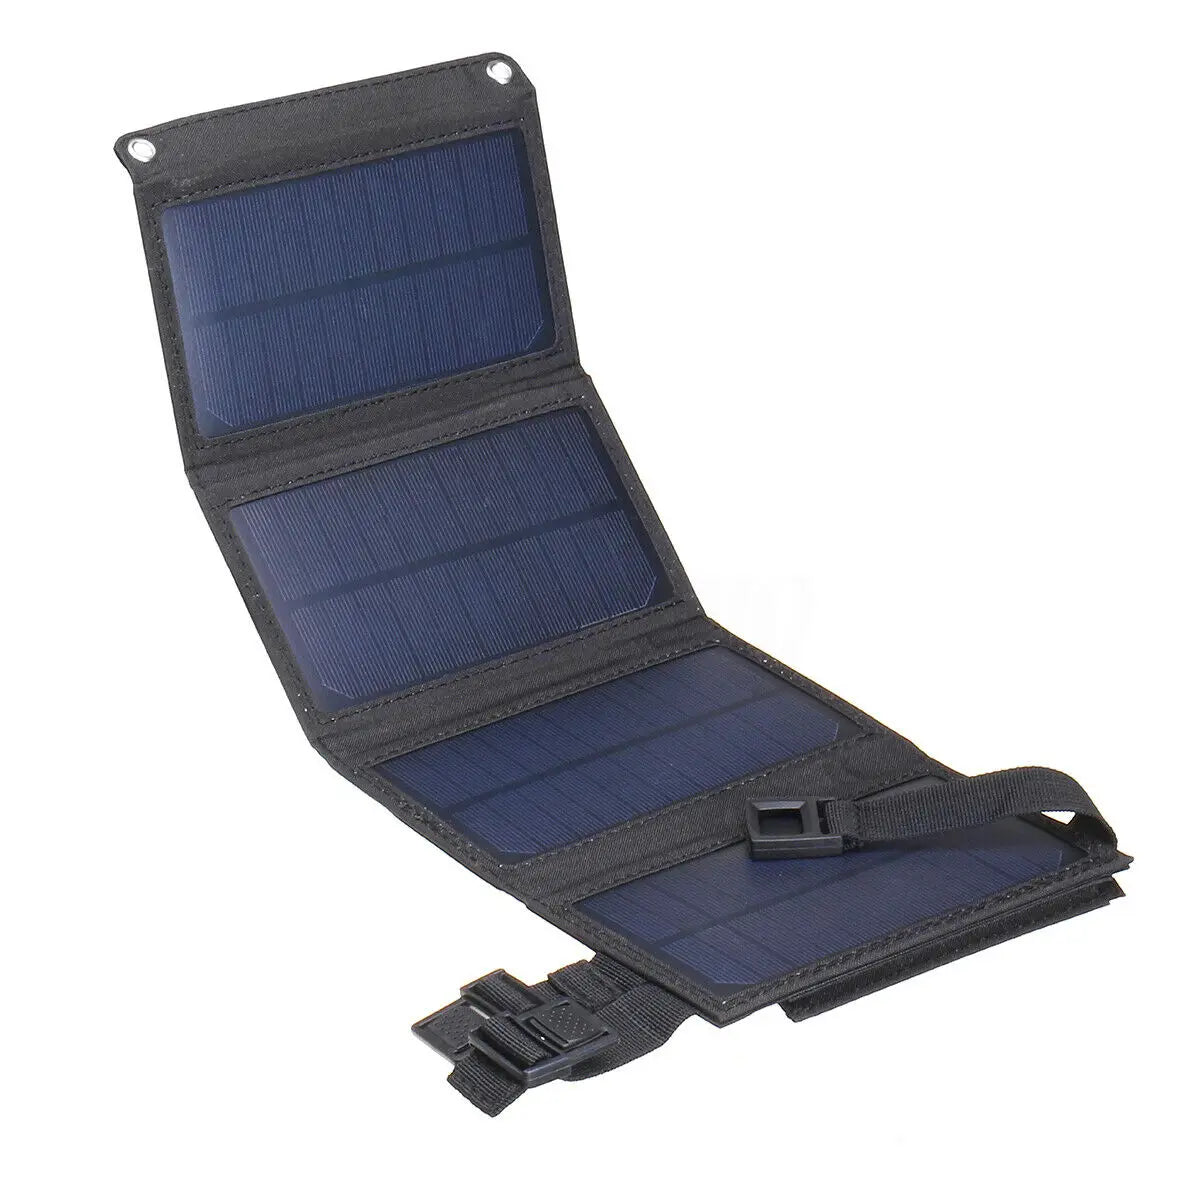 20W Outdoor Foldable Solar Panel, Charges devices via USB, no internal battery needed; simply plug in and power on.